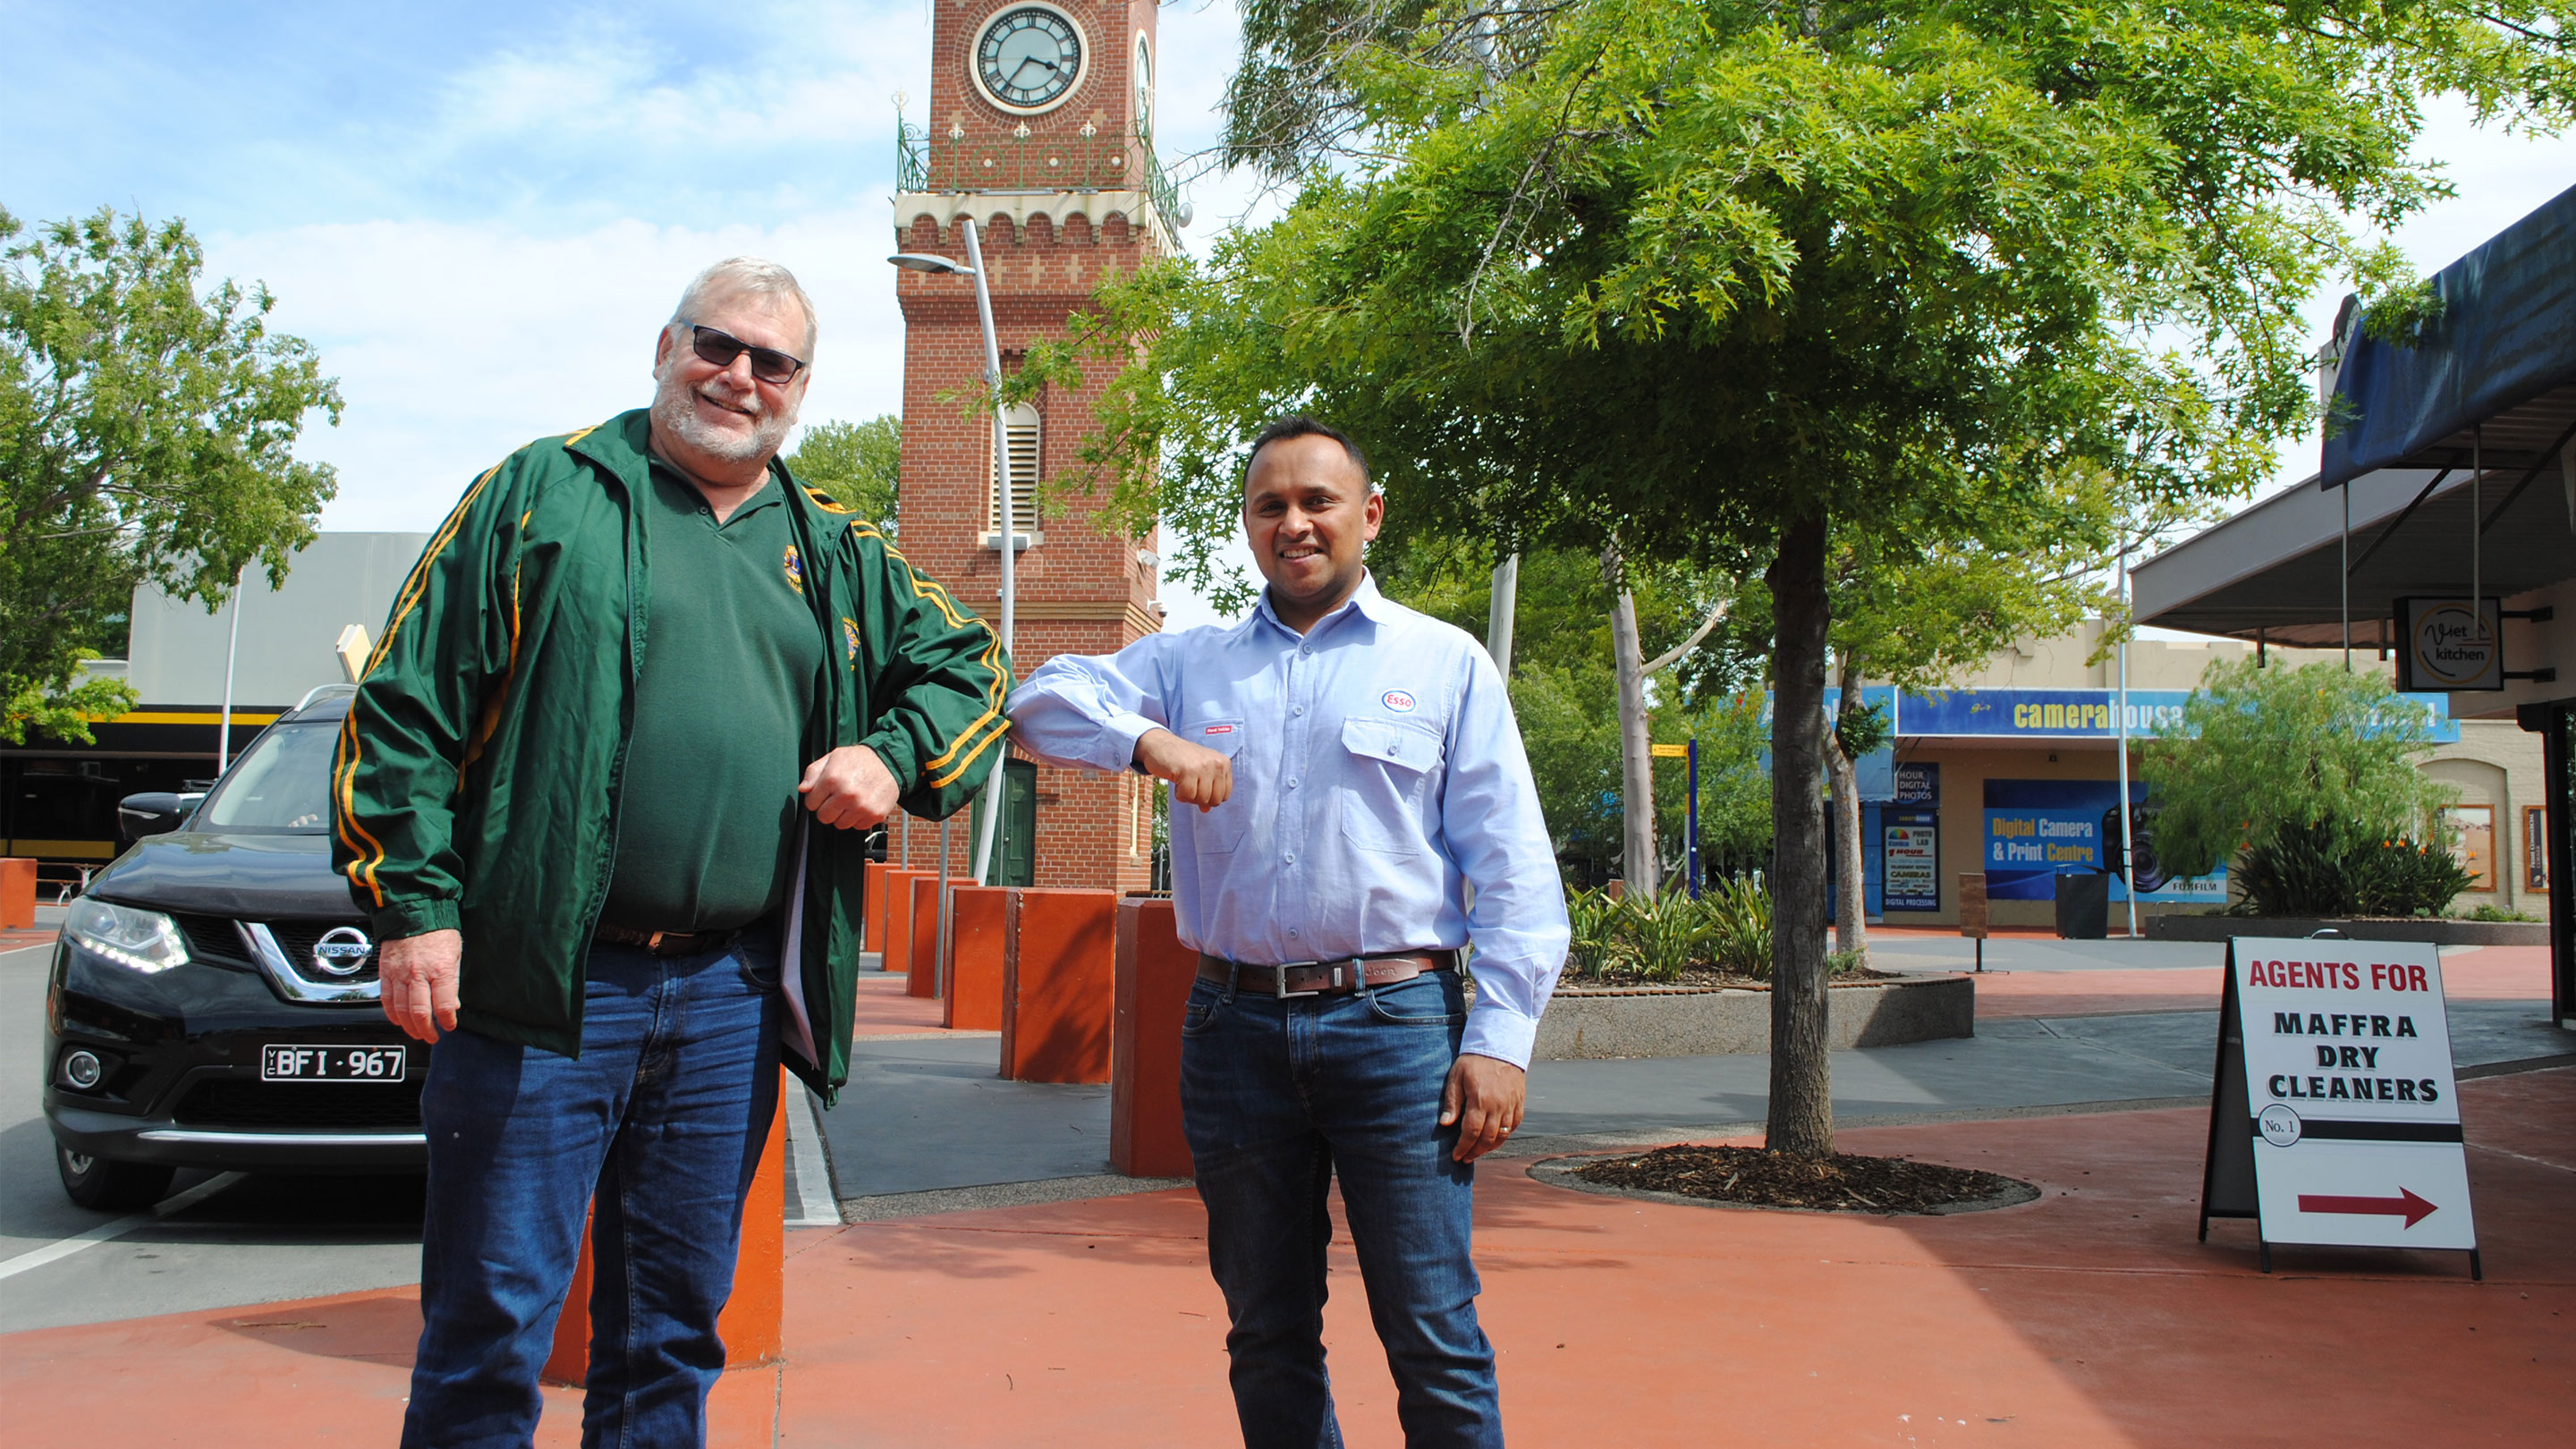 Image Roger Lurz of the Sale Lions Club (left) and Esso Longford Plants Manager, Kartik Garg, recently met to confirm Esso's ongoing support of the Sale Lions Club Christmas Hampers for the 46th year. Photo courtesy of Sarah Luke, Gippsland Times.